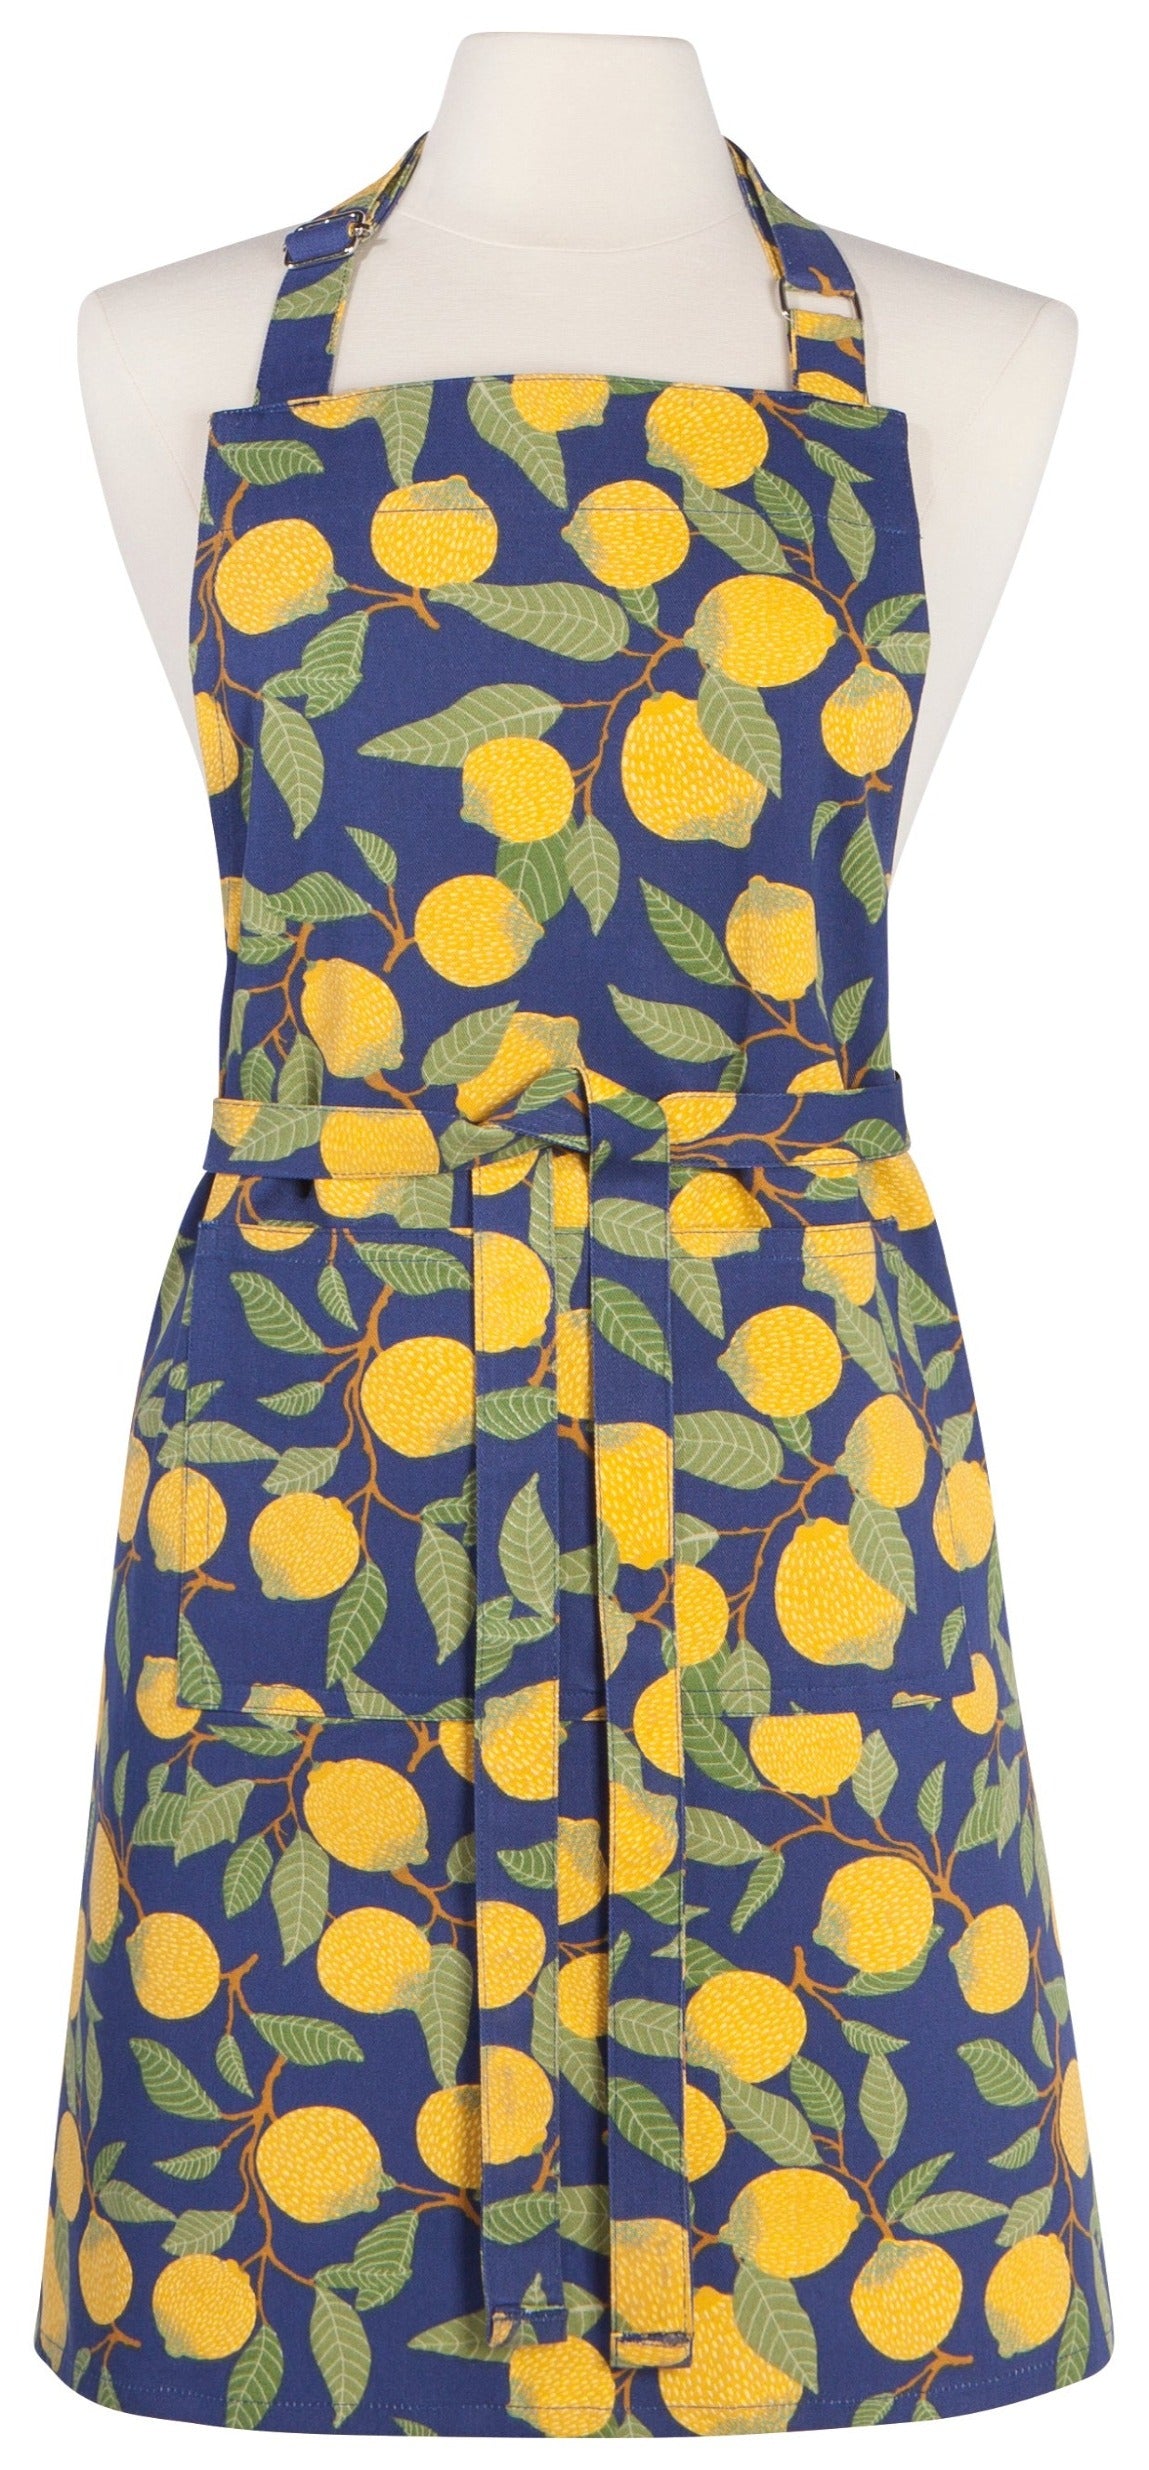 blue apron with lemons attached to stems printed on it